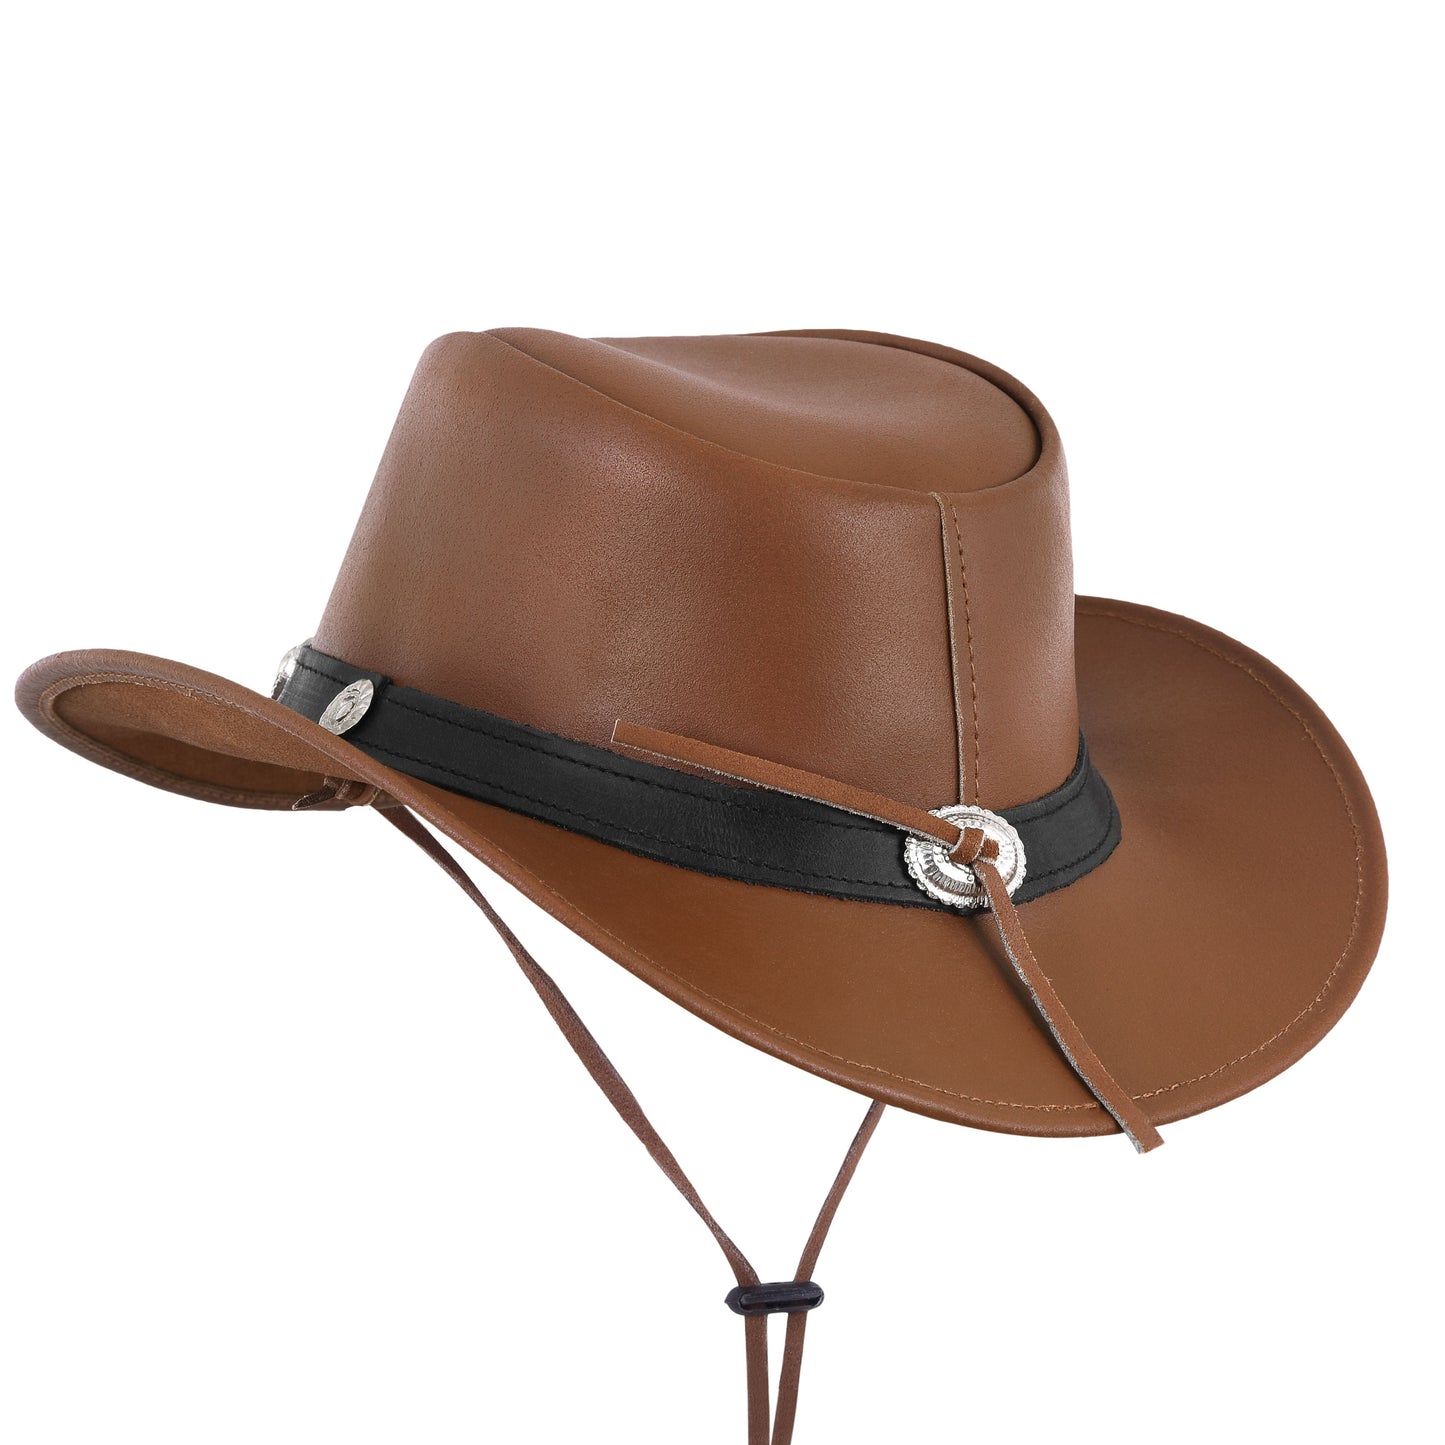 Western Style Tan Leather Cowboy Hat with Decorative Hat Band